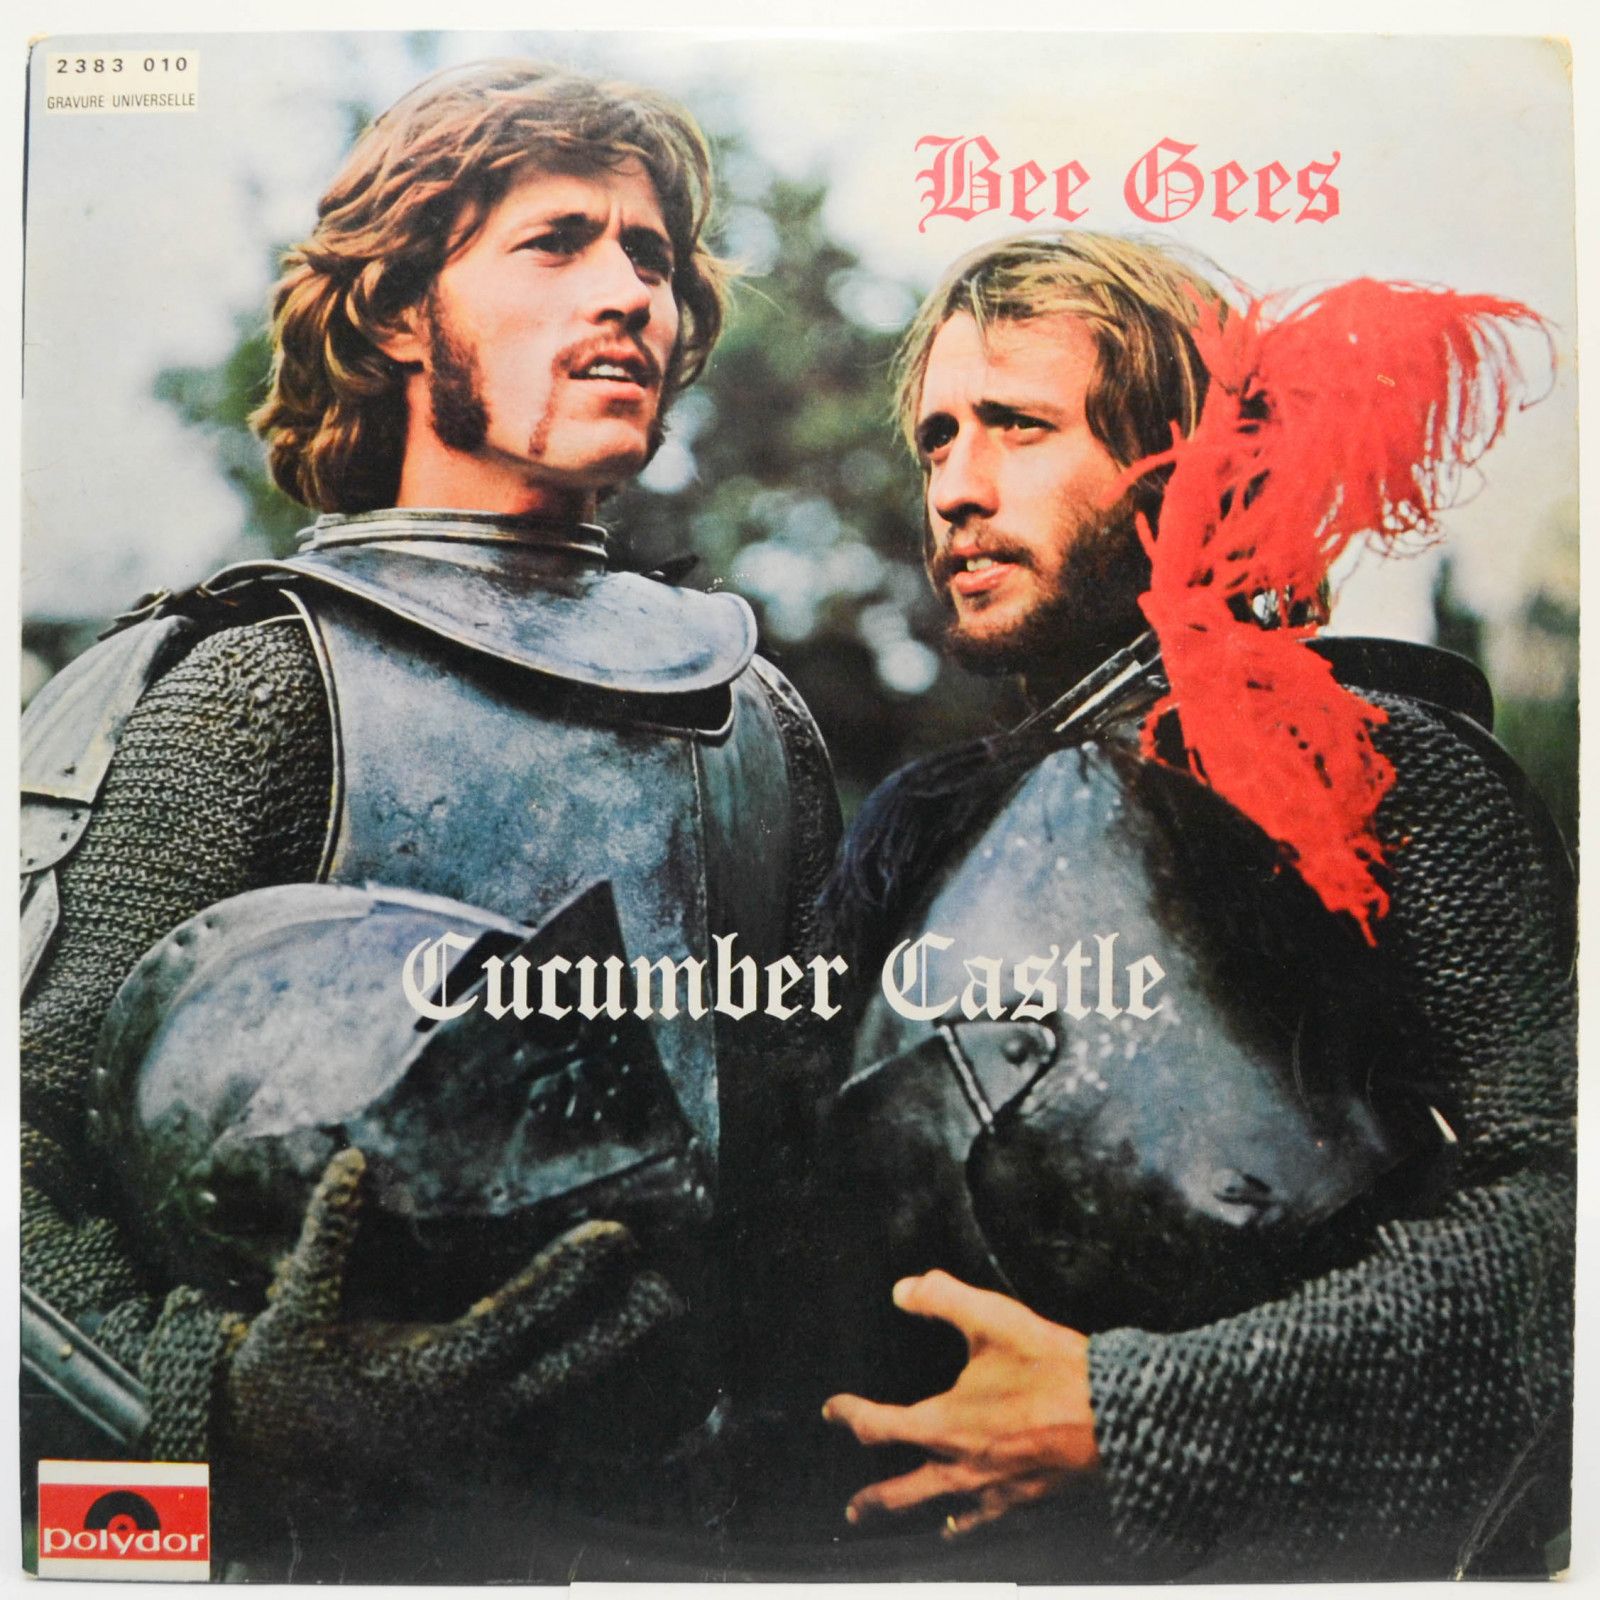 Bee Gees — Cucumber Castle, 1970